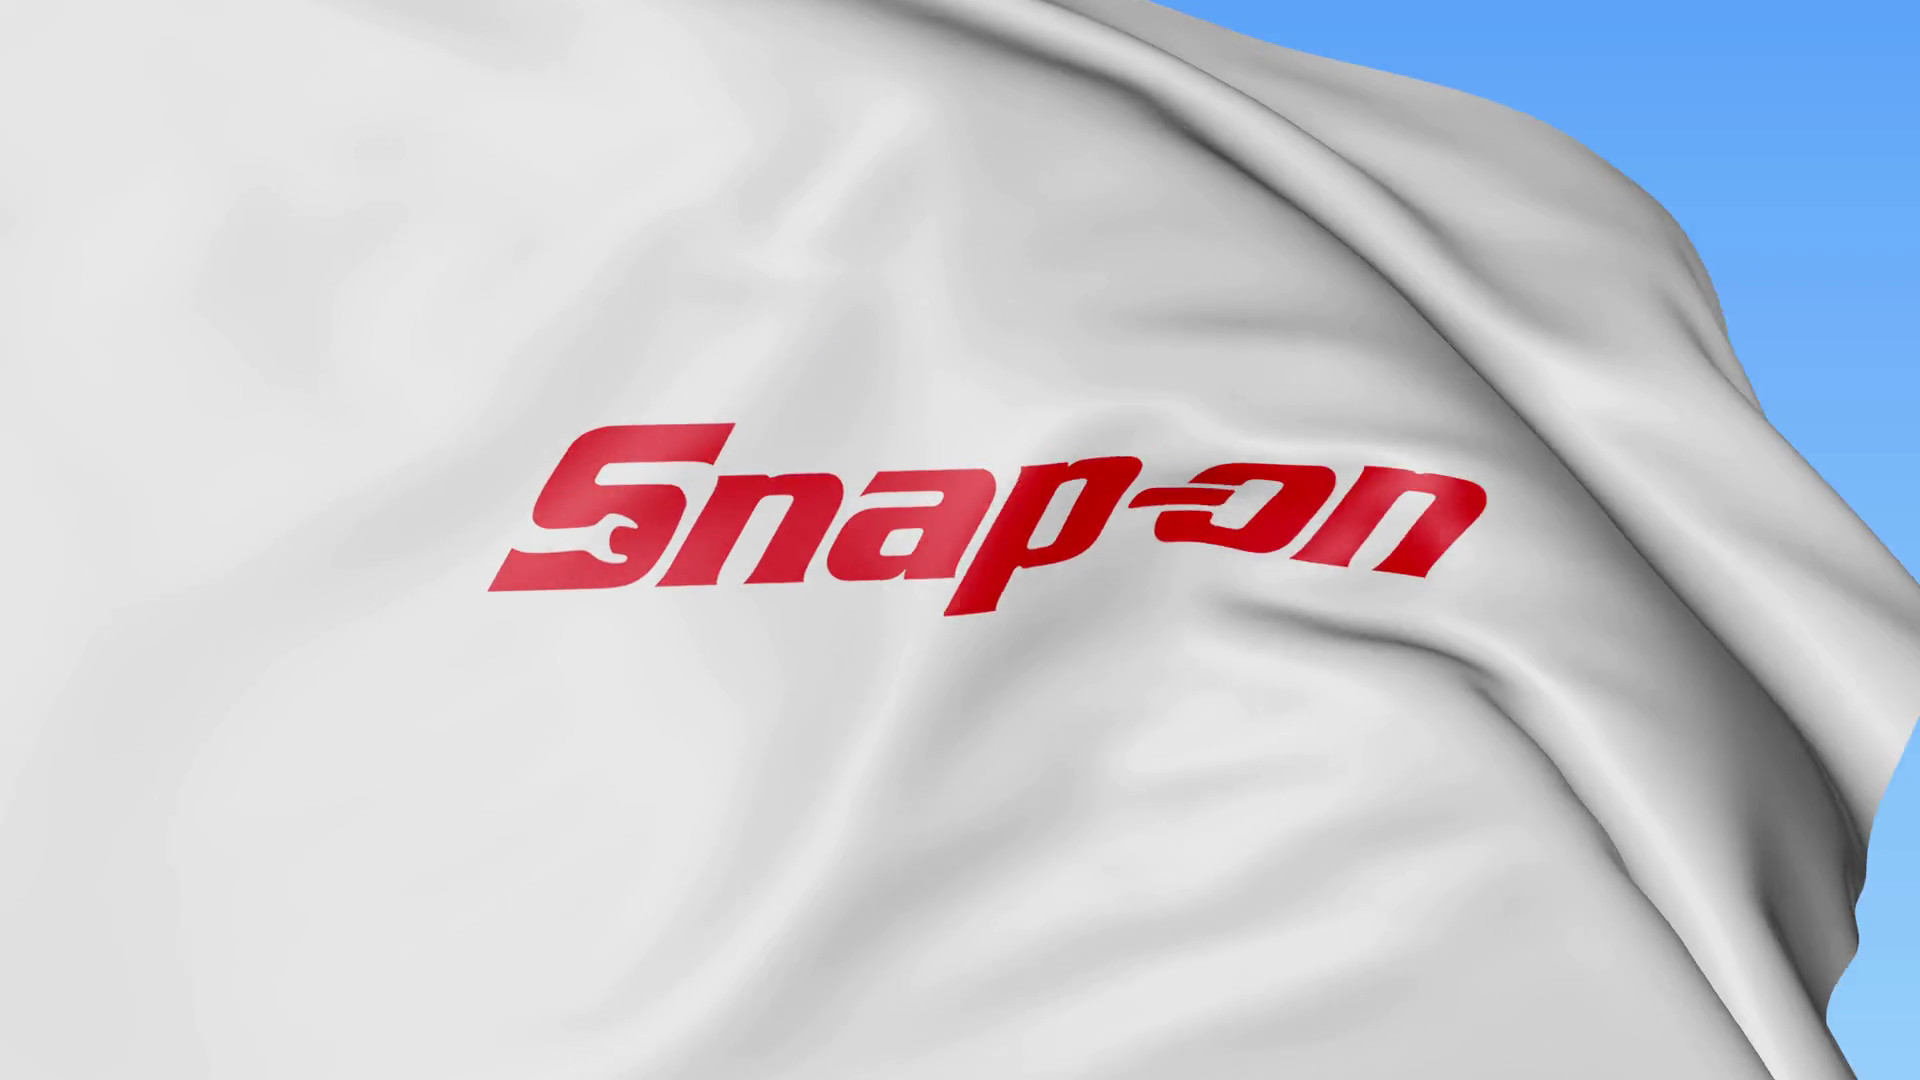 1920x1080, Waving Flag With Snap On Logo - Snap On Wallpaper Hd - HD Wallpaper 